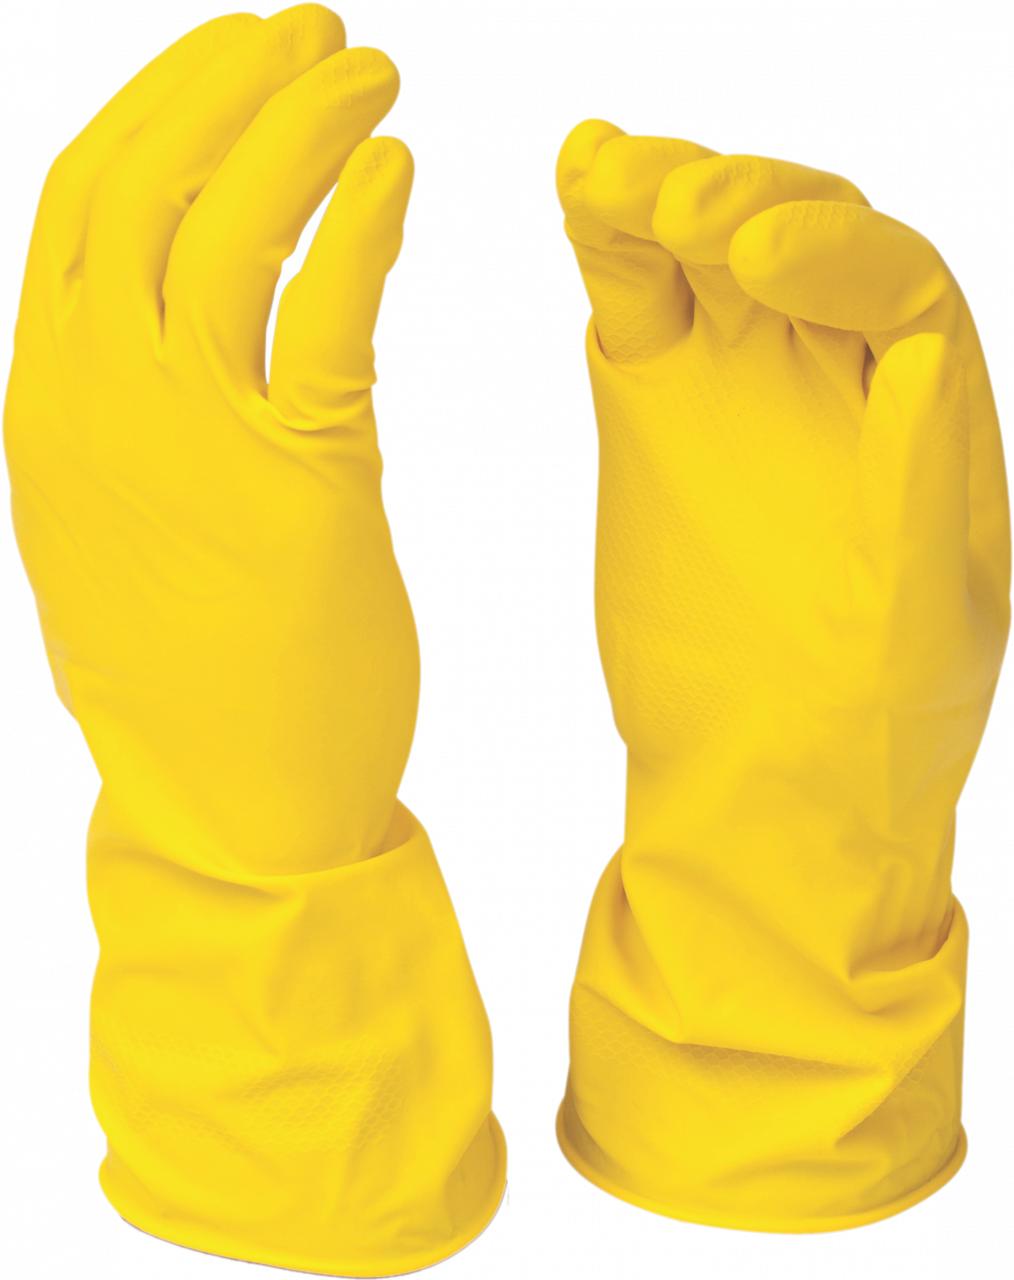 Glove Household Flock Lined S - XL. Sizes: SML - XL